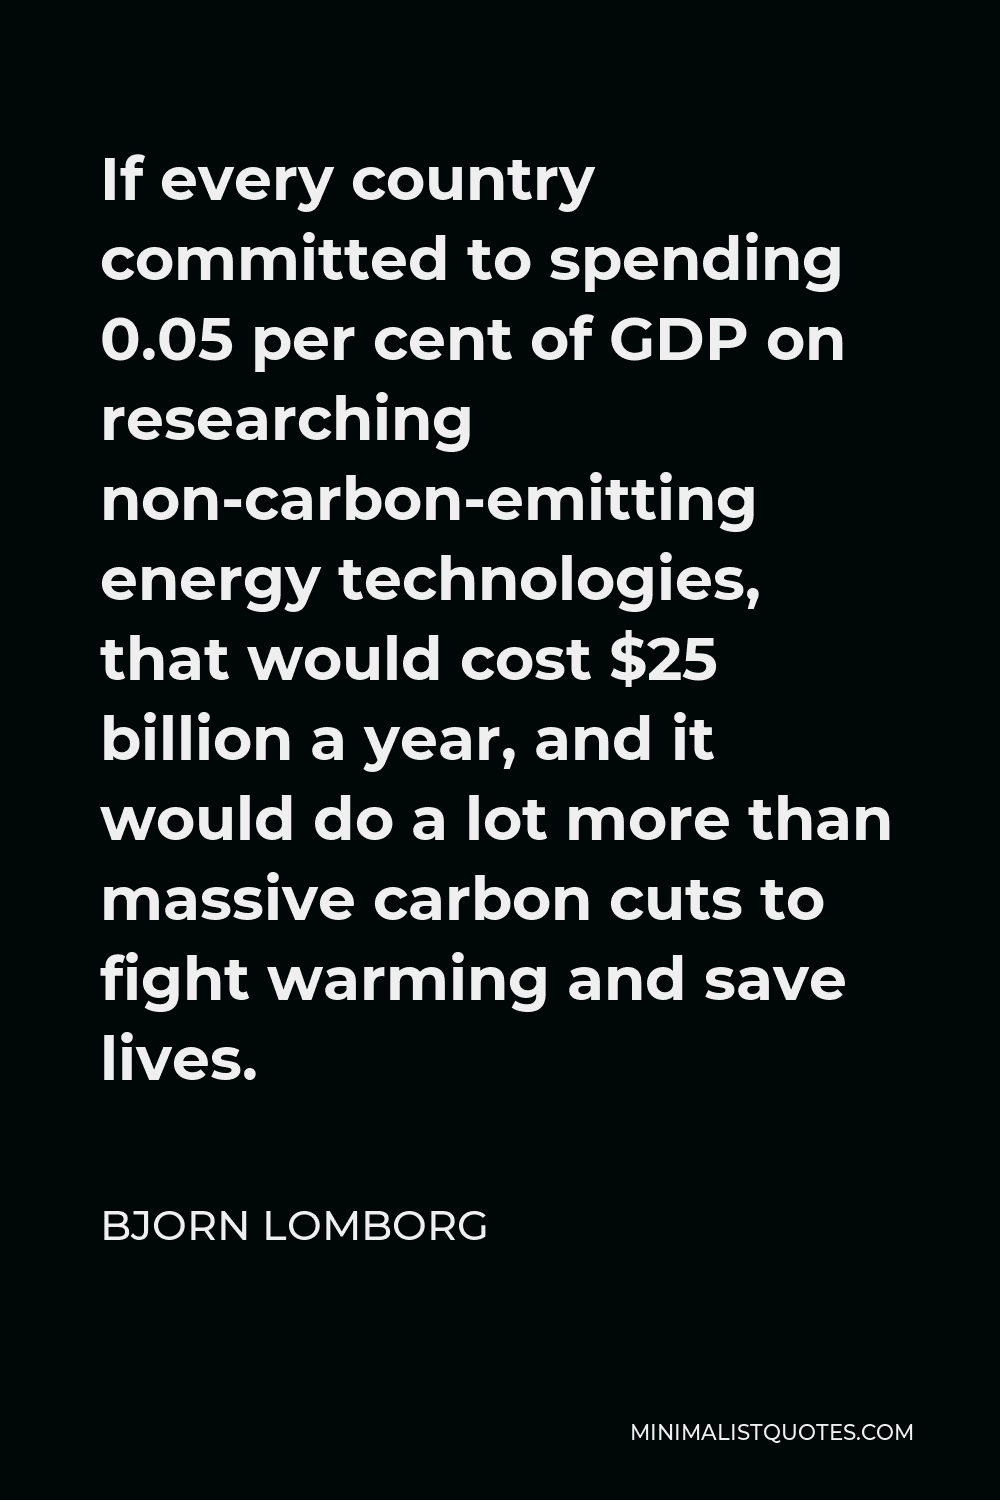 Bjorn Lomborg Quote - If every country committed to spending 0.05 per cent of GDP on researching non-carbon-emitting energy technologies, that would cost $25 billion a year, and it would do a lot more than massive carbon cuts to fight warming and save lives.